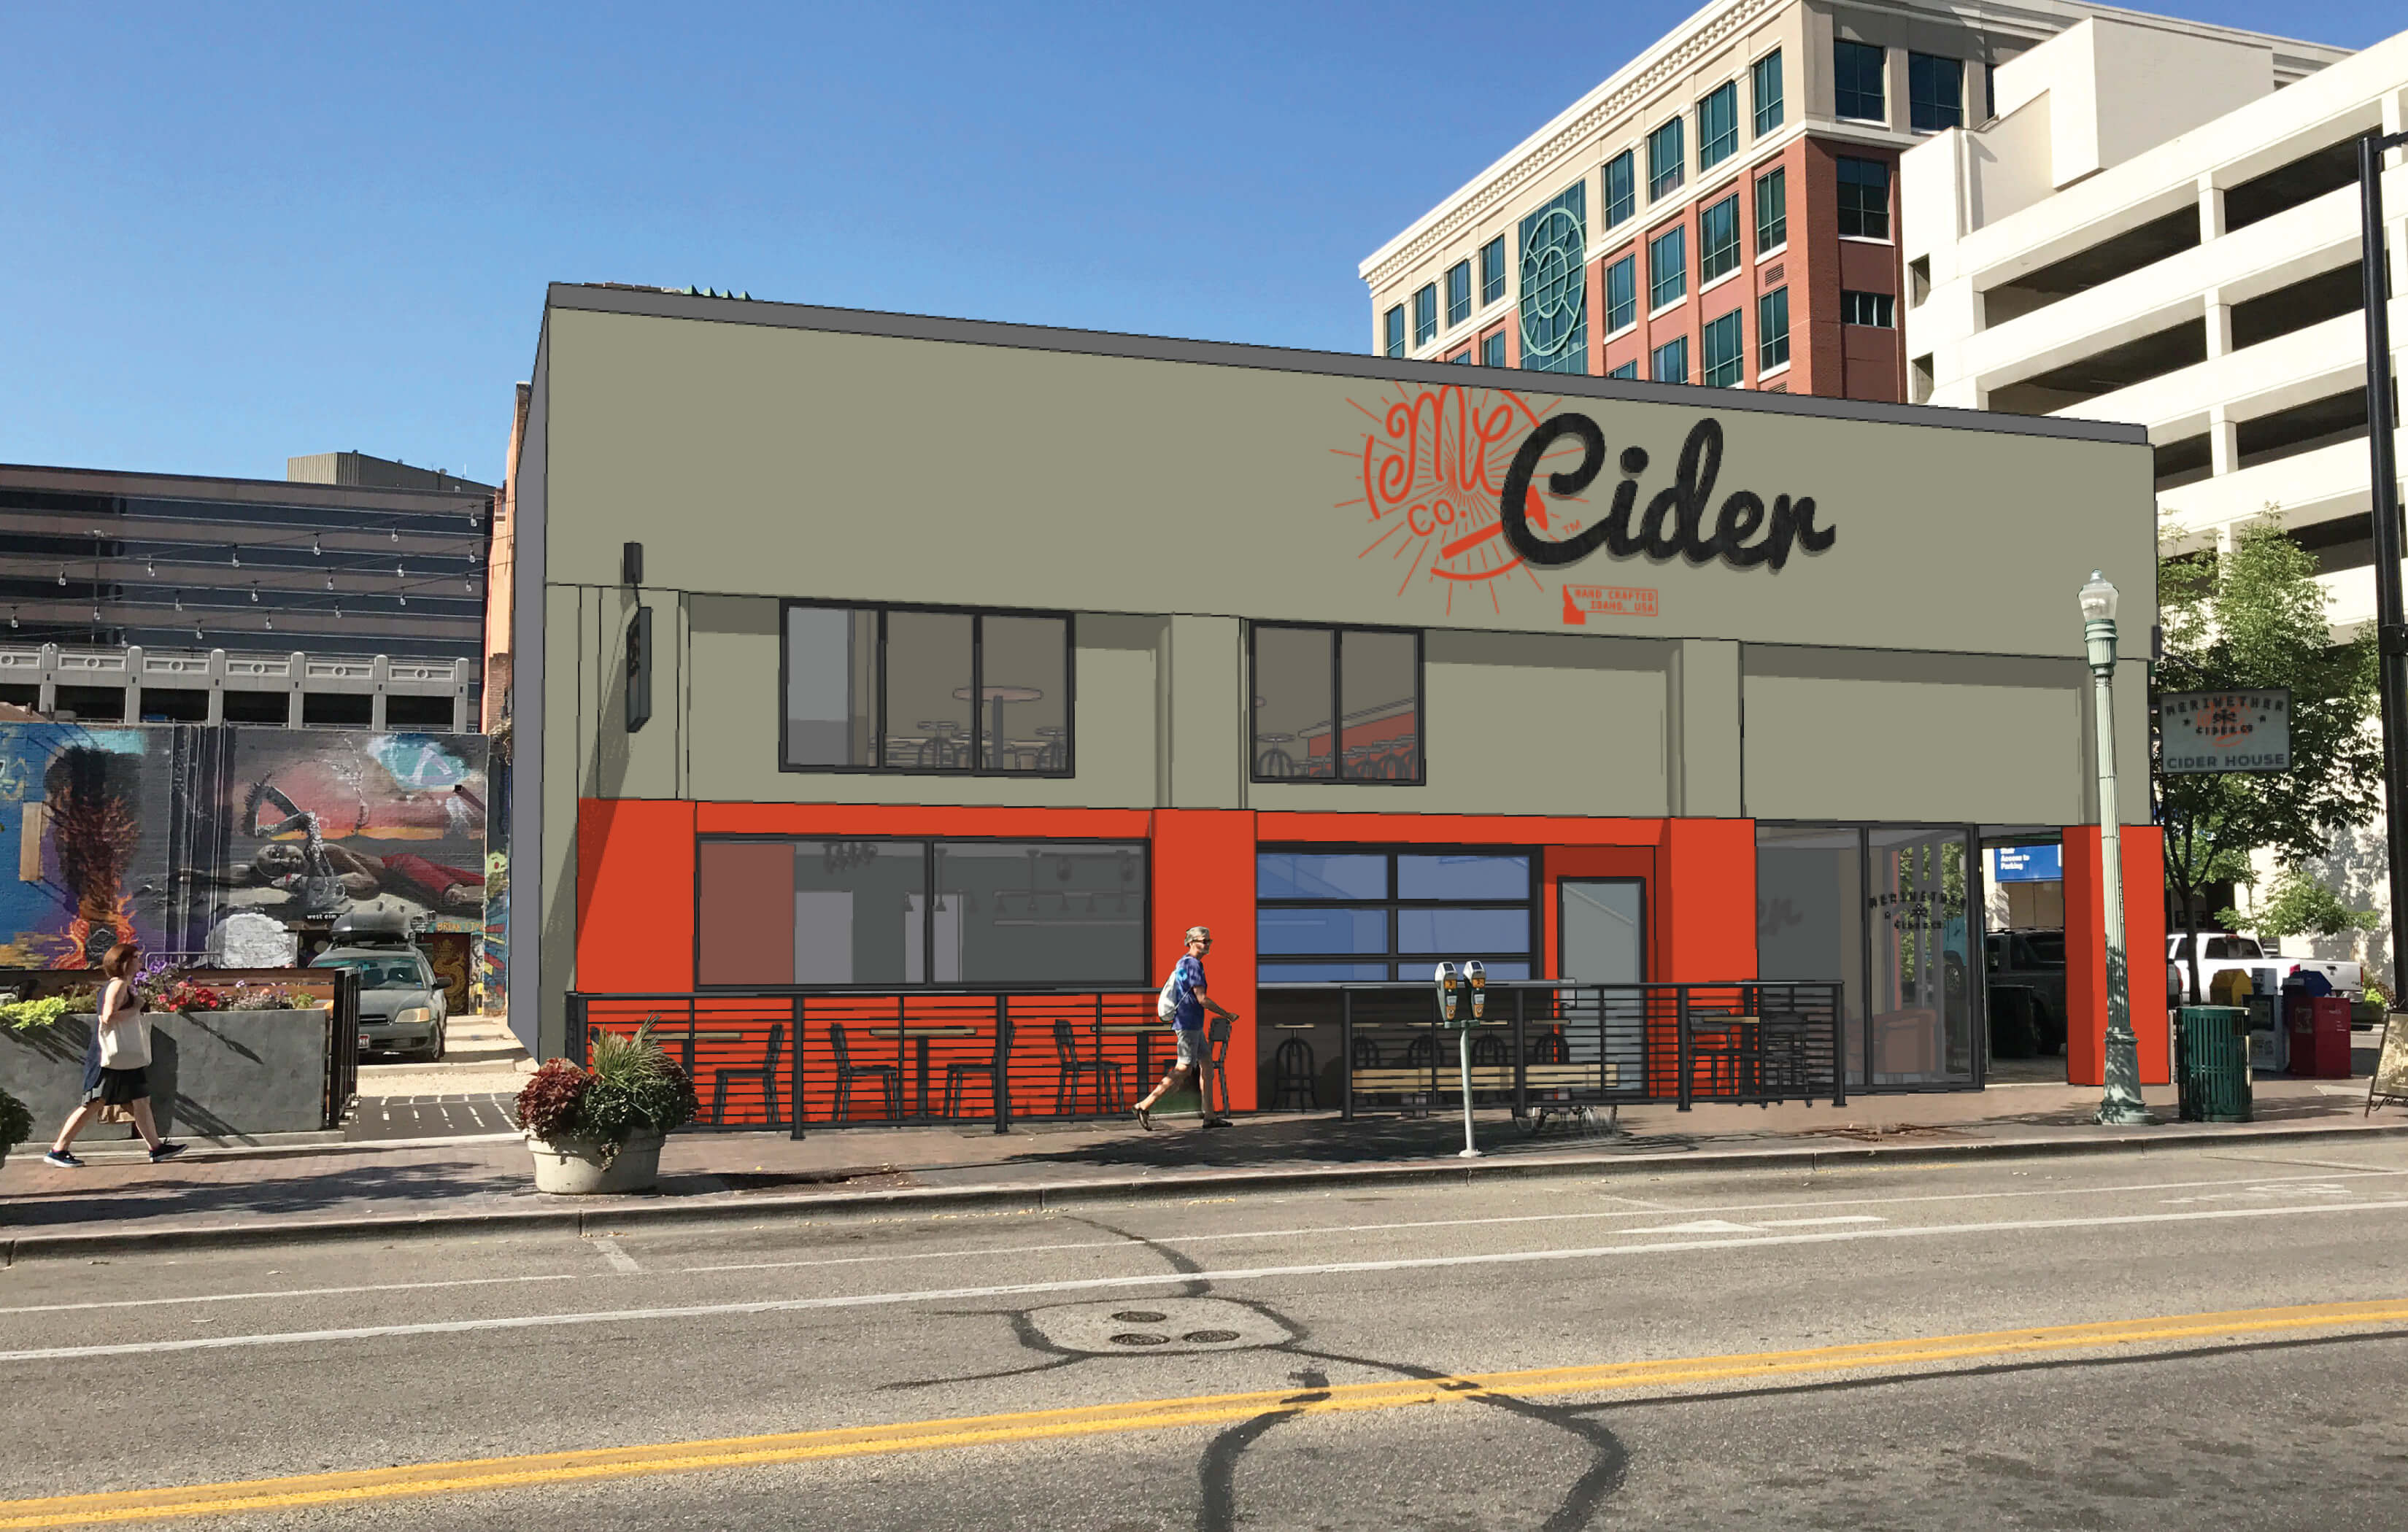 Meriwether Cider Co. to Open Idaho’s First Cider House in Downtown Boise